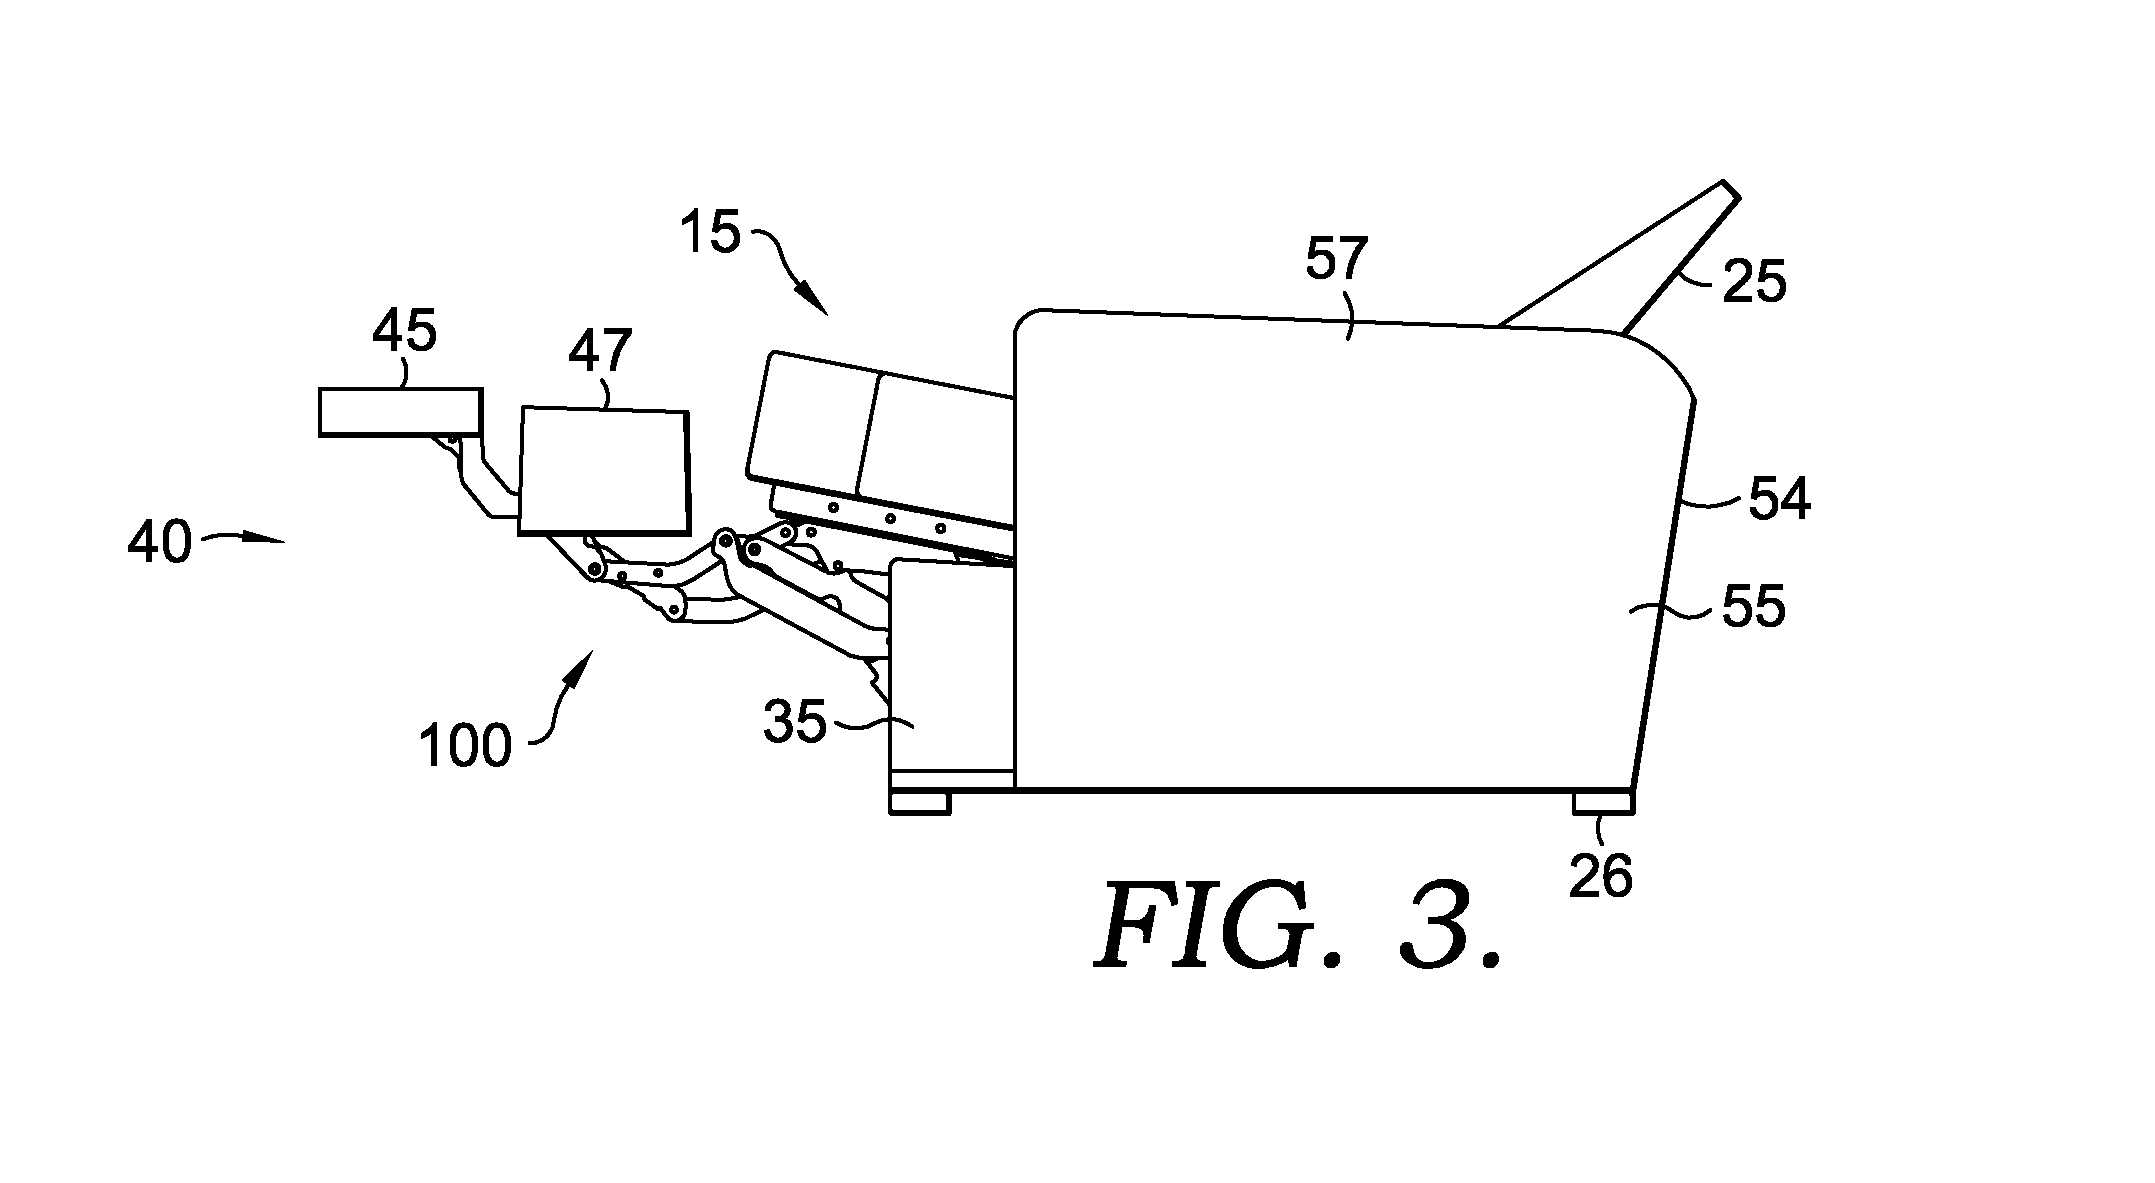 Zero-wall clearance linkage mechanism for providing additional layout